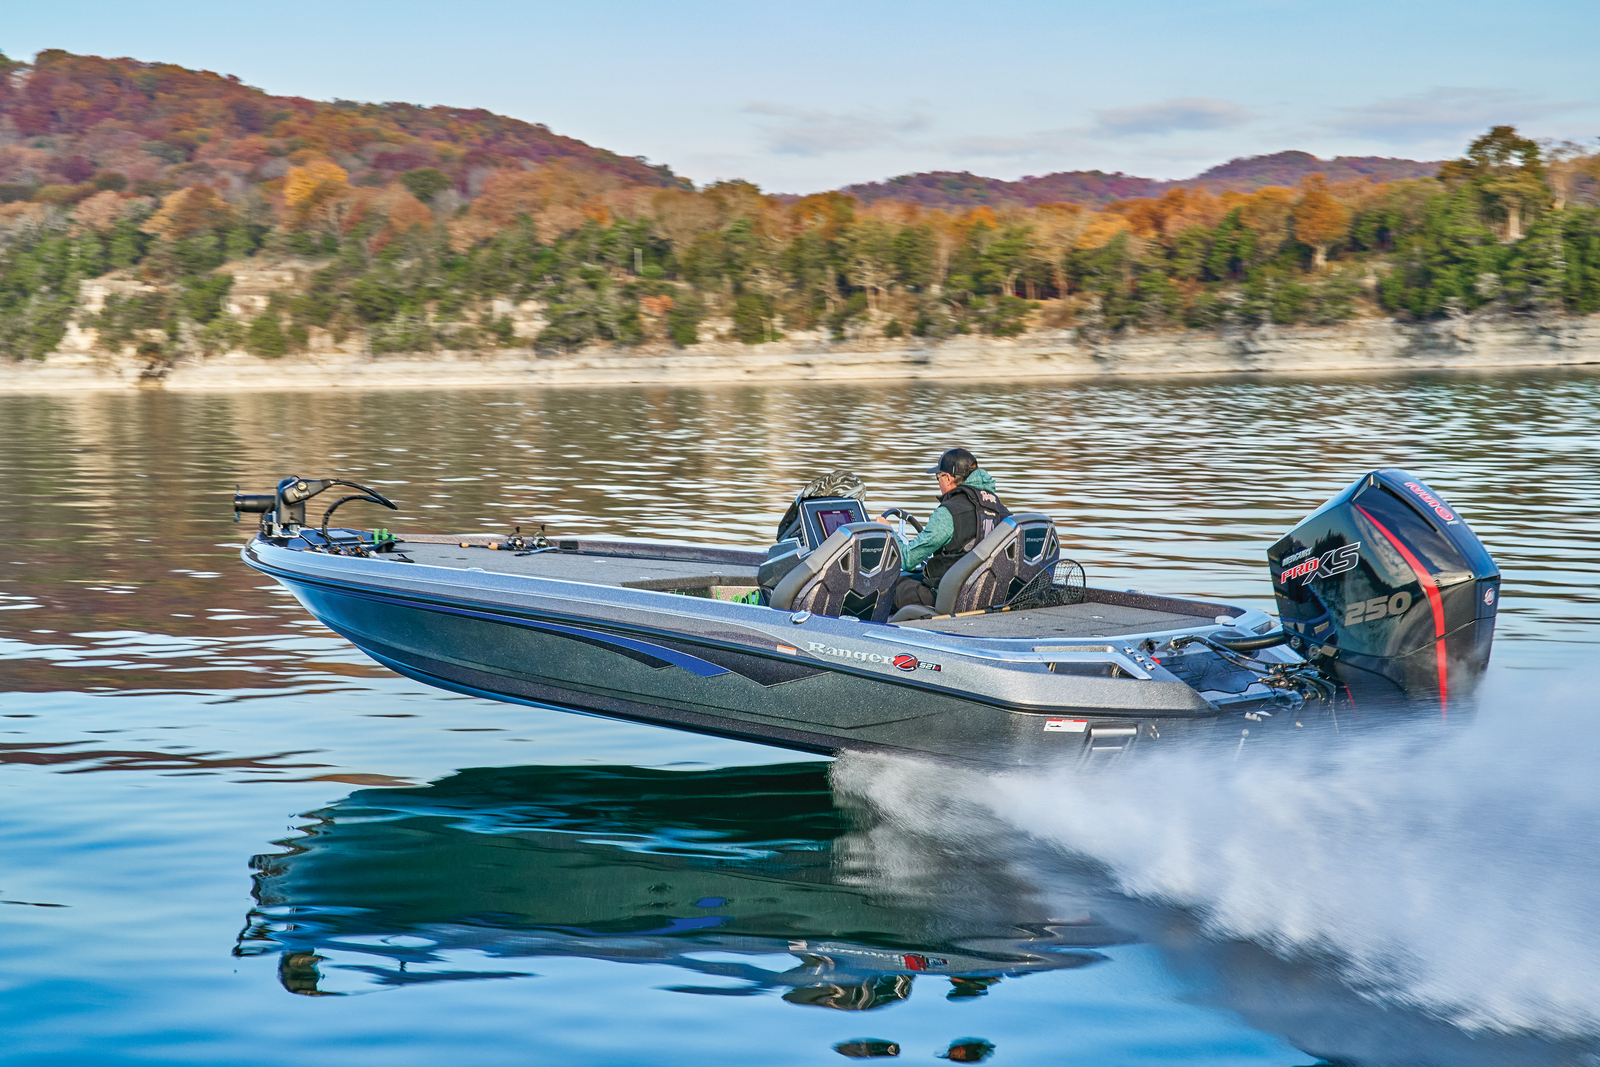 Boating and Off Road Brands For Sale at Bass Pro Boating Centers